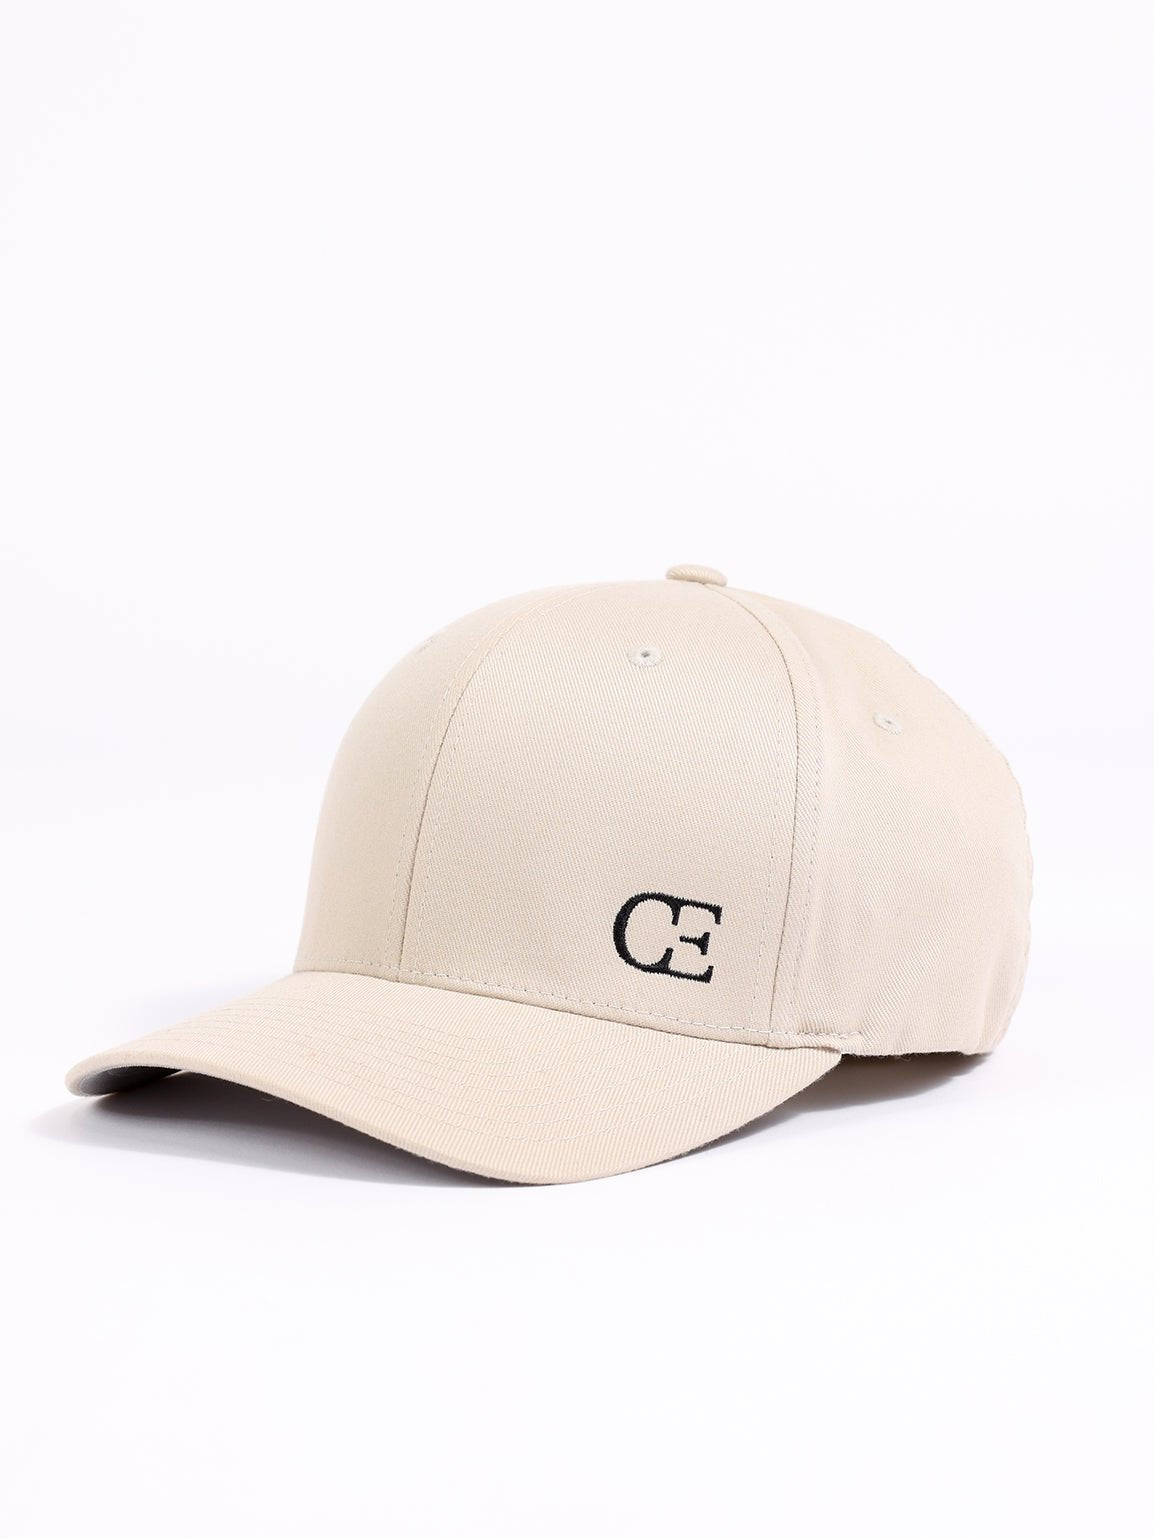 Stone urban classic hat side view with white background |Color:Stone/Black